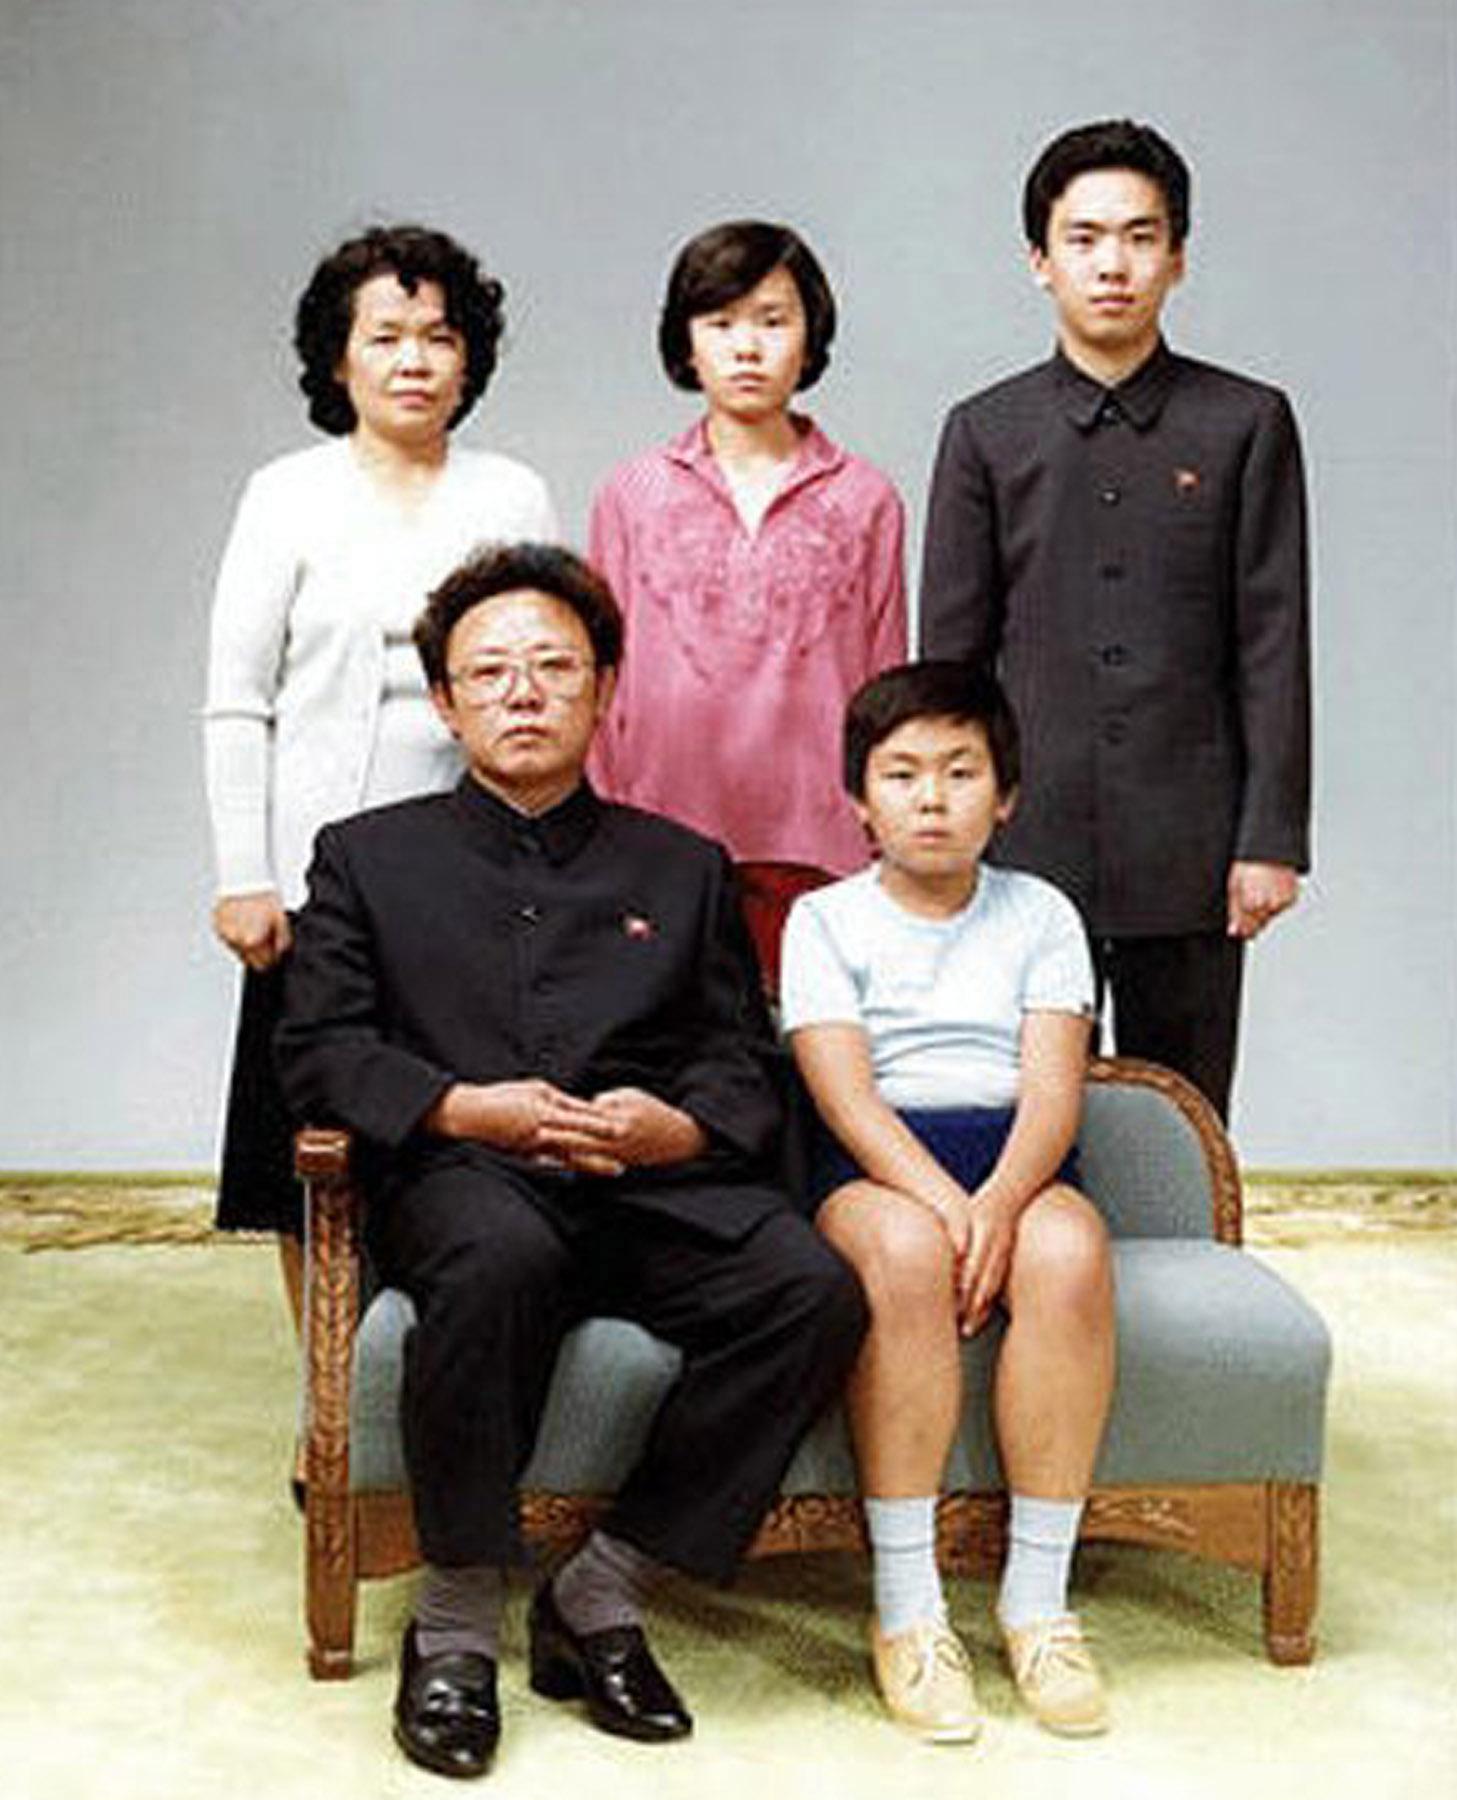 Kim Jong Il poses with his first-born son Kim Jong Nam in this 1981 family photo in Pyongyang (Choongang Monthly Magazine/Newsmakers/Getty)